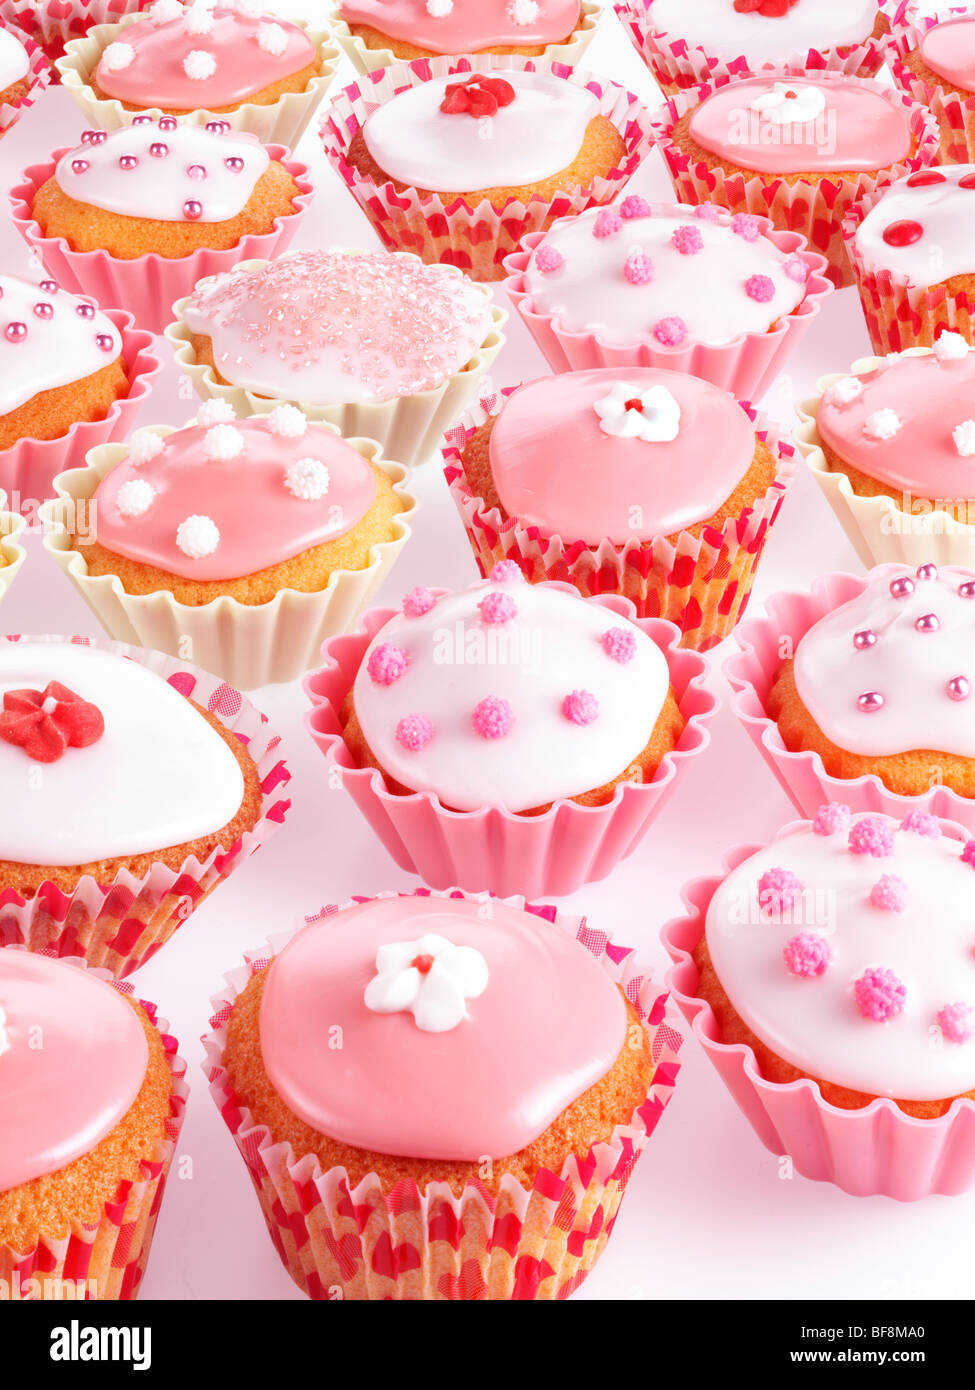 PINK AND WHITE CUPCAKES OR FAIRY CAKES Stock Photo